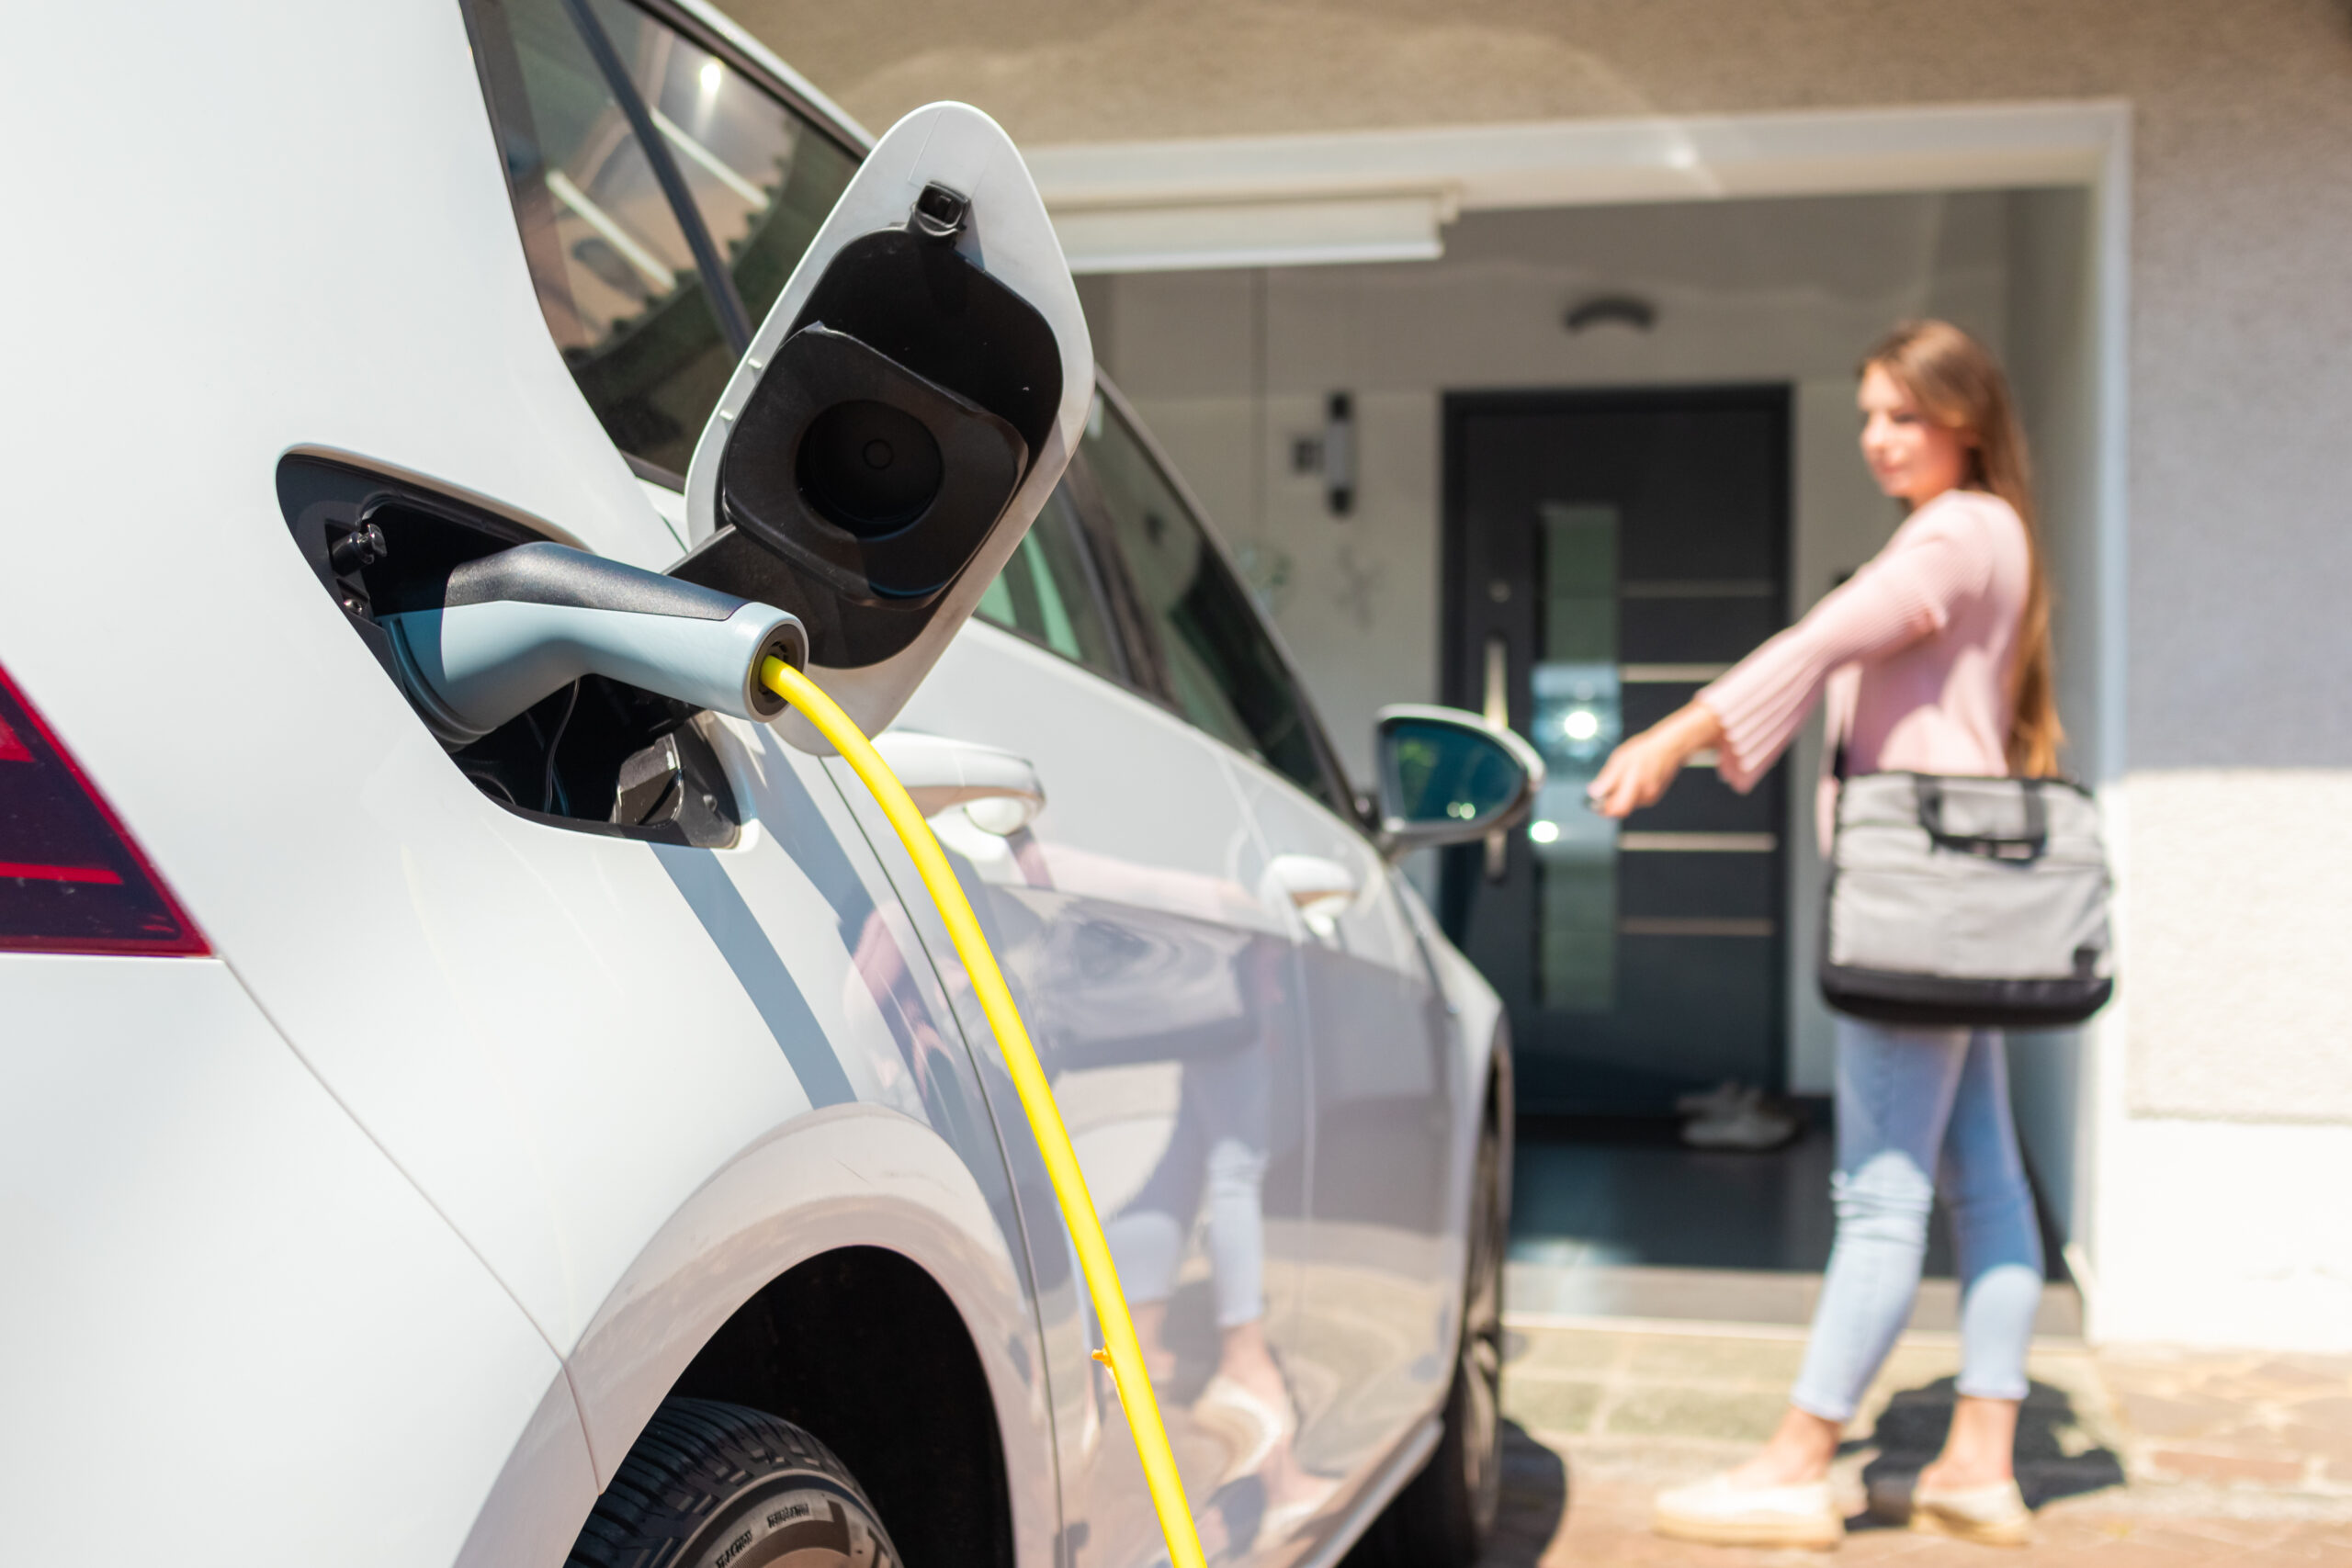 Can I Charge My Electric Vehicle at Home?